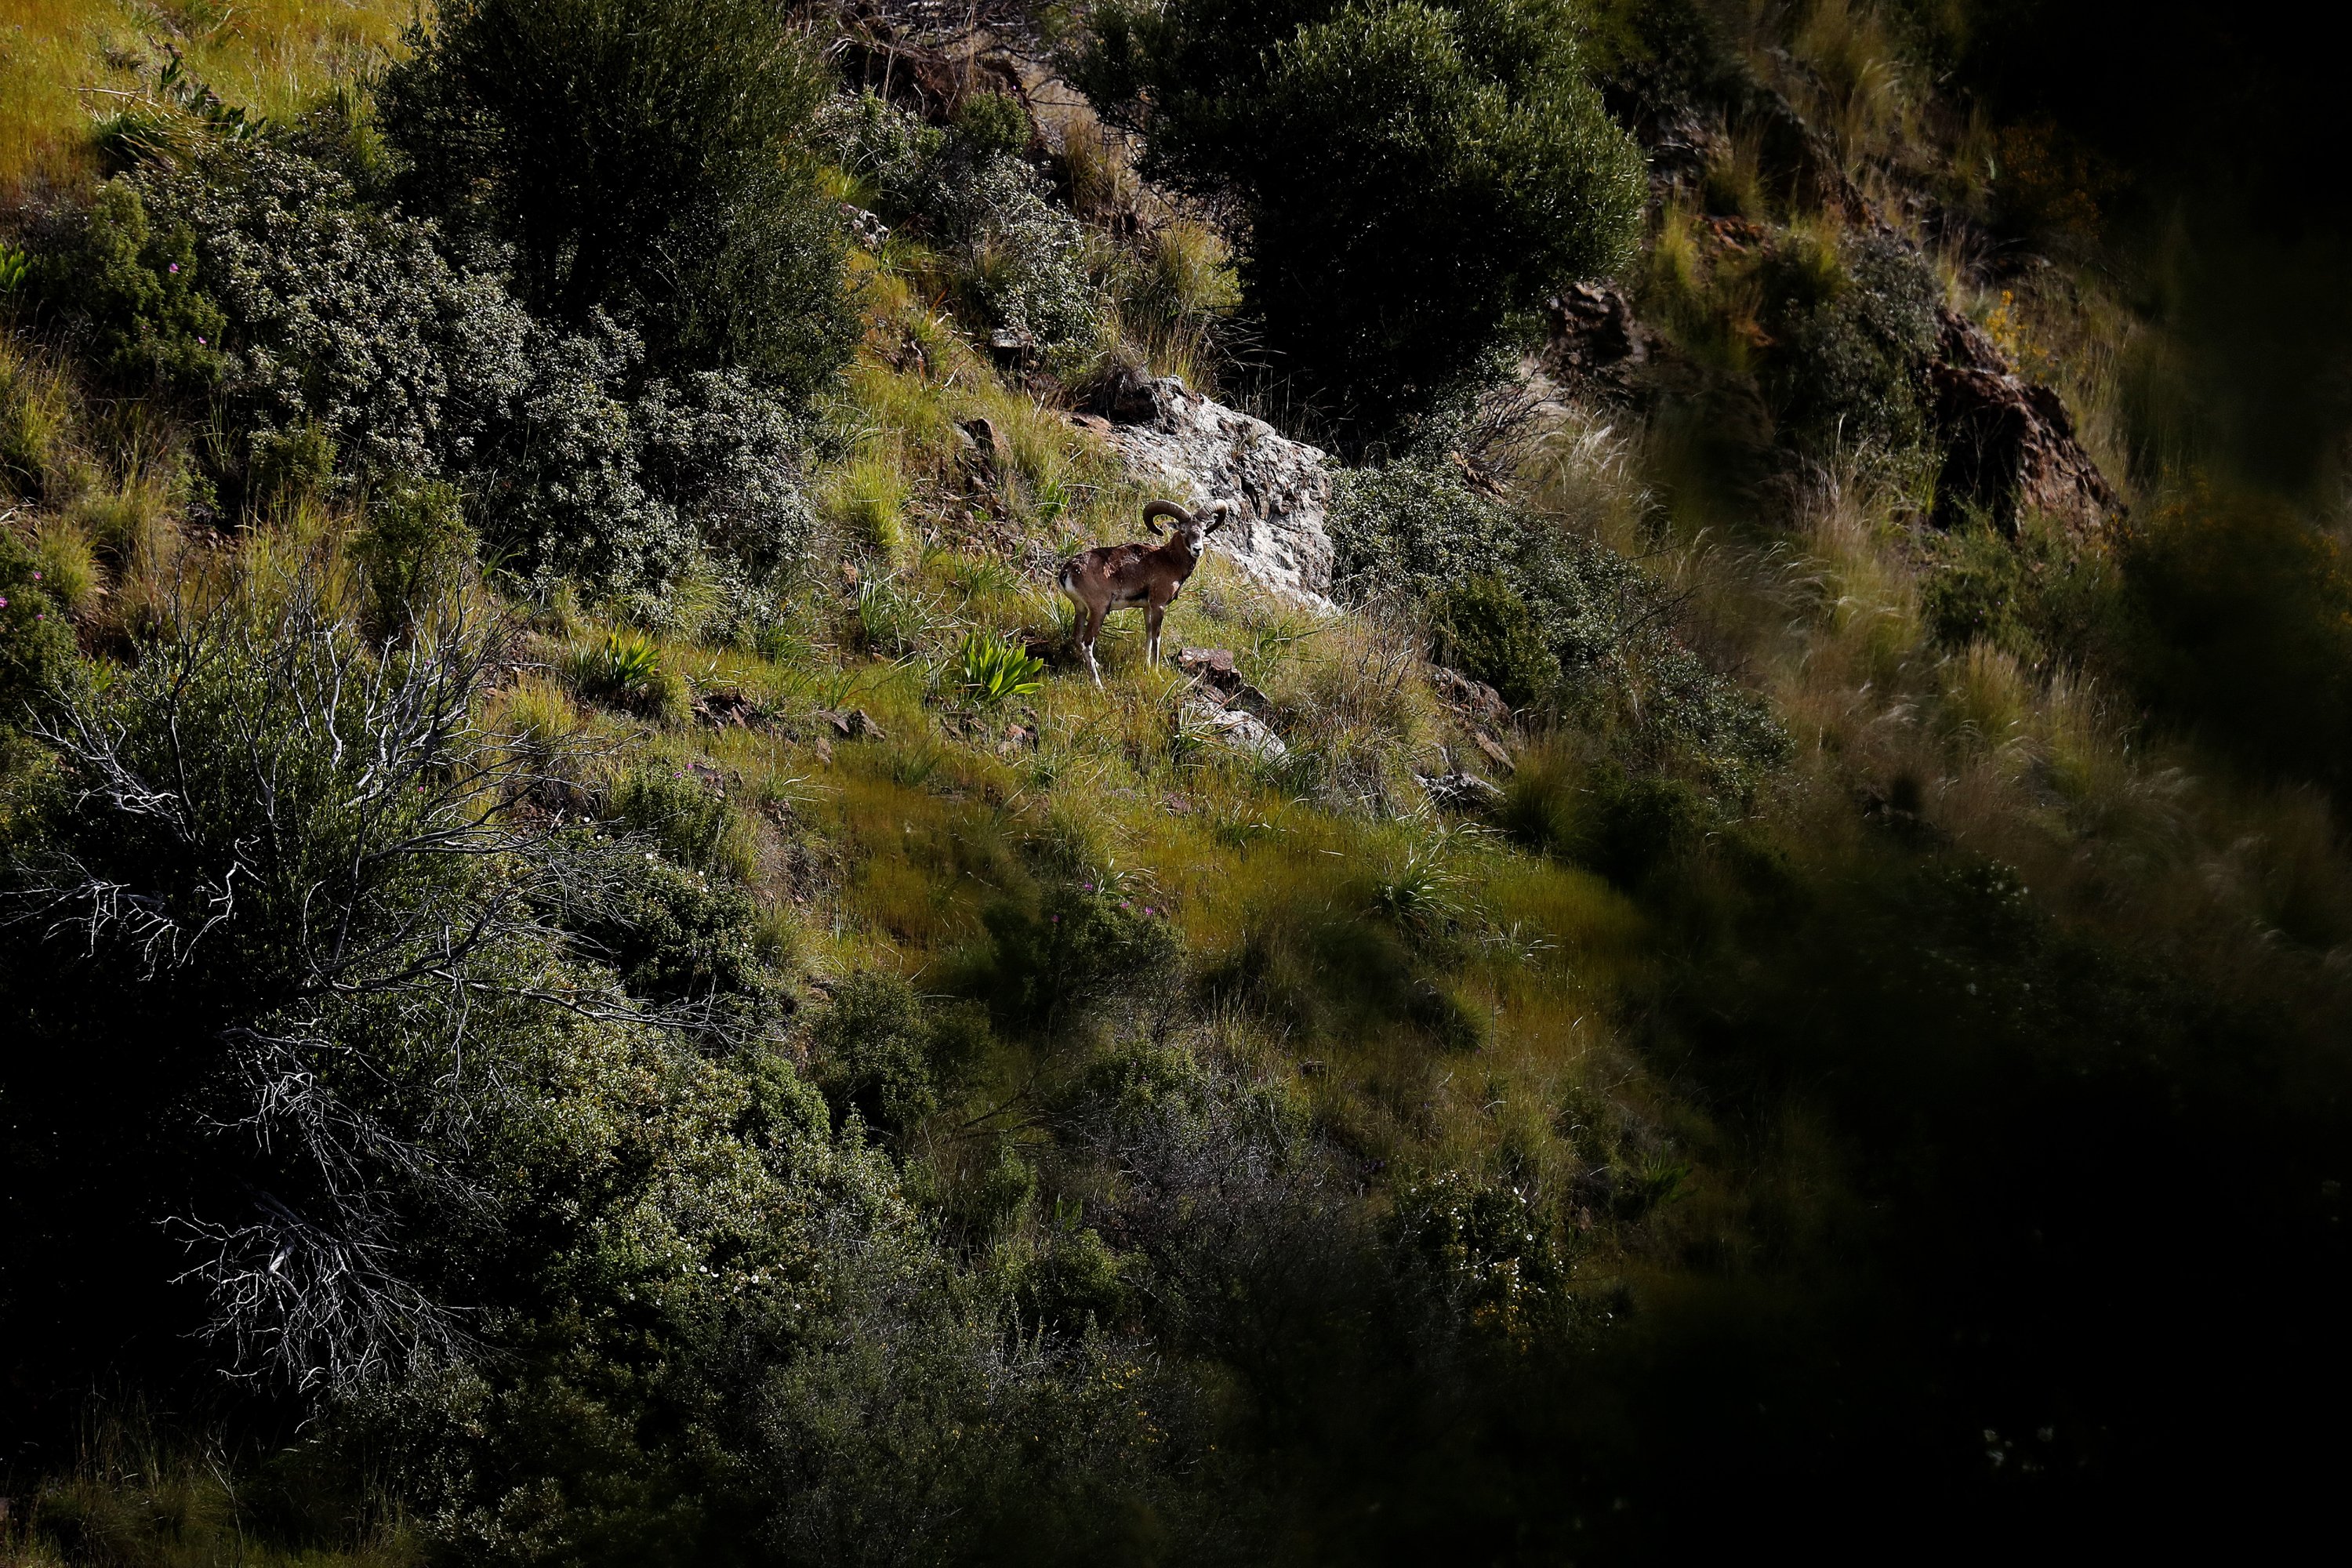 An endangered Mouflon sheep stands in the forest near the abandoned village of Varisia, inside the U.N.-controlled buffer zone that divides the Greek-controlled south and the Turkish-controlled north, on the island of Cyprus, March 26, 2021. (AP Photo)